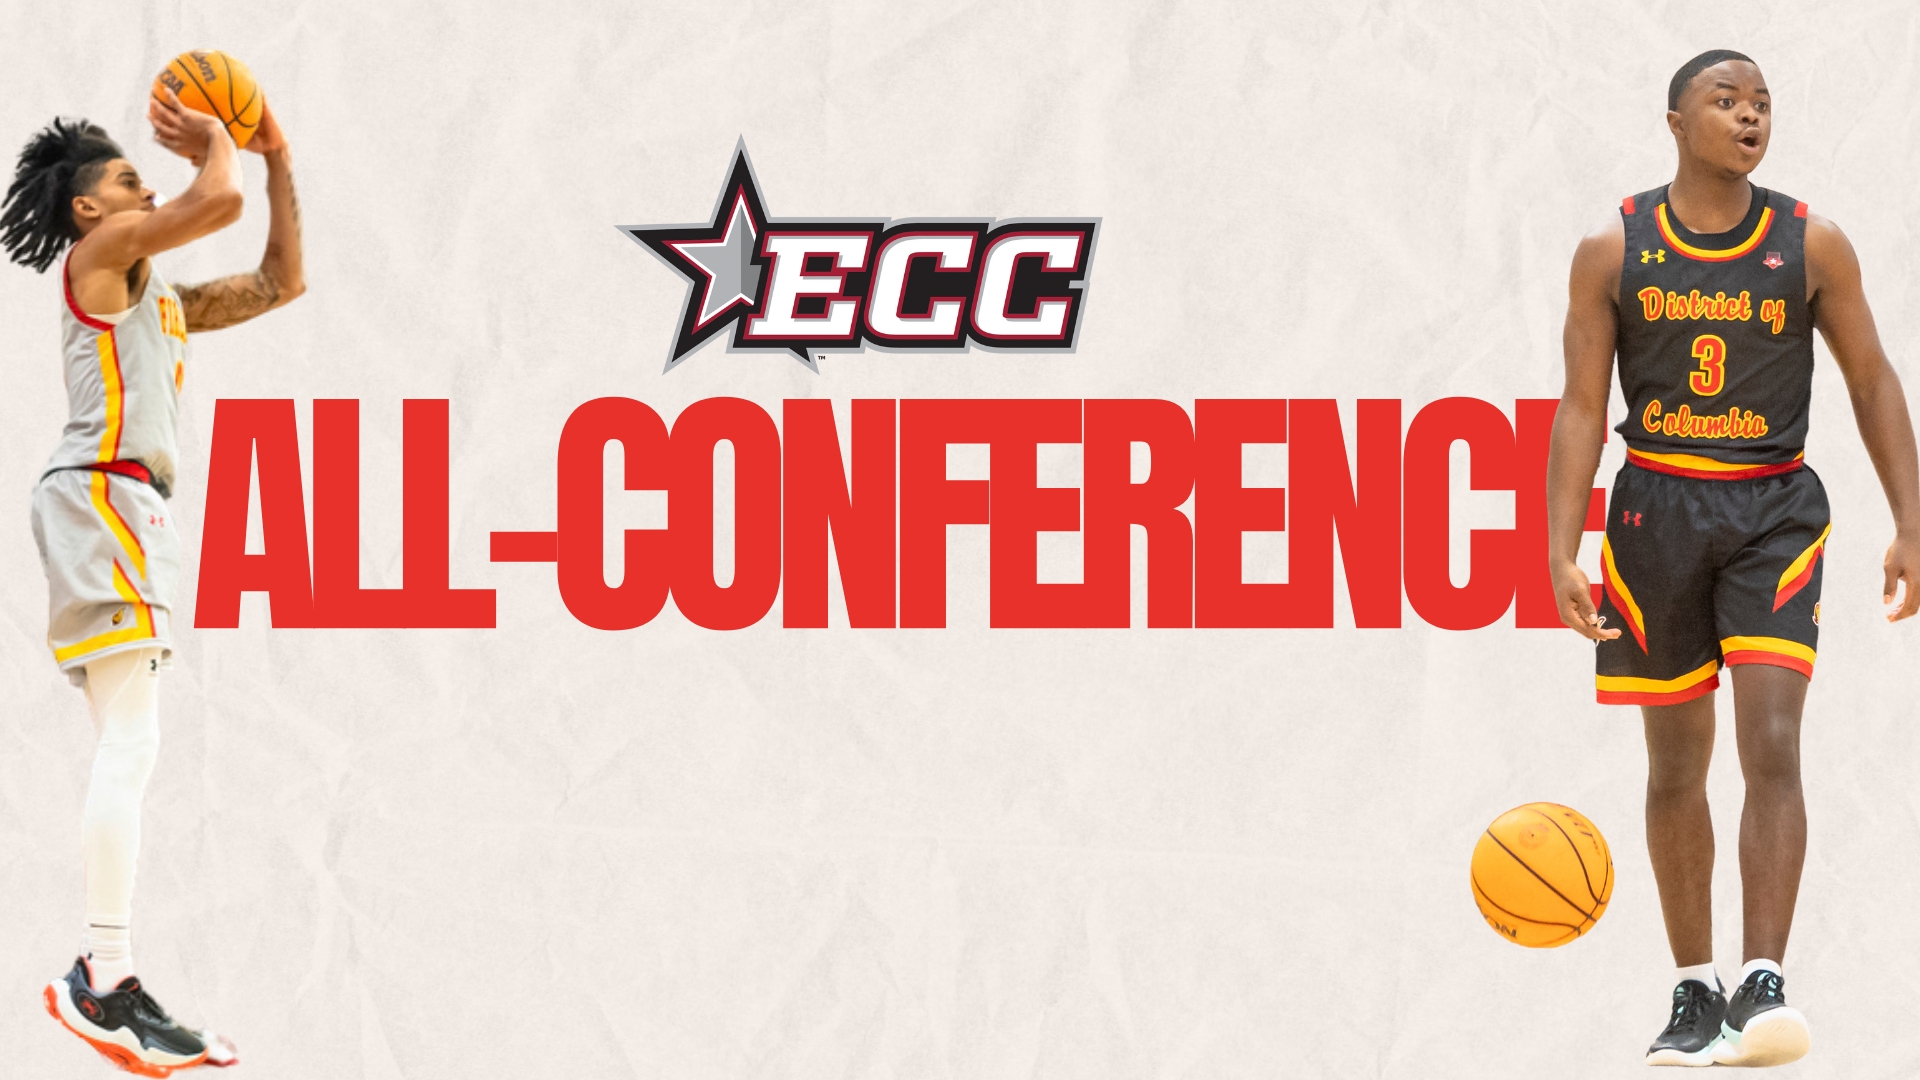 Eric Morgan Jr and Tevin Curtis Named to ECC All-Conference Teams